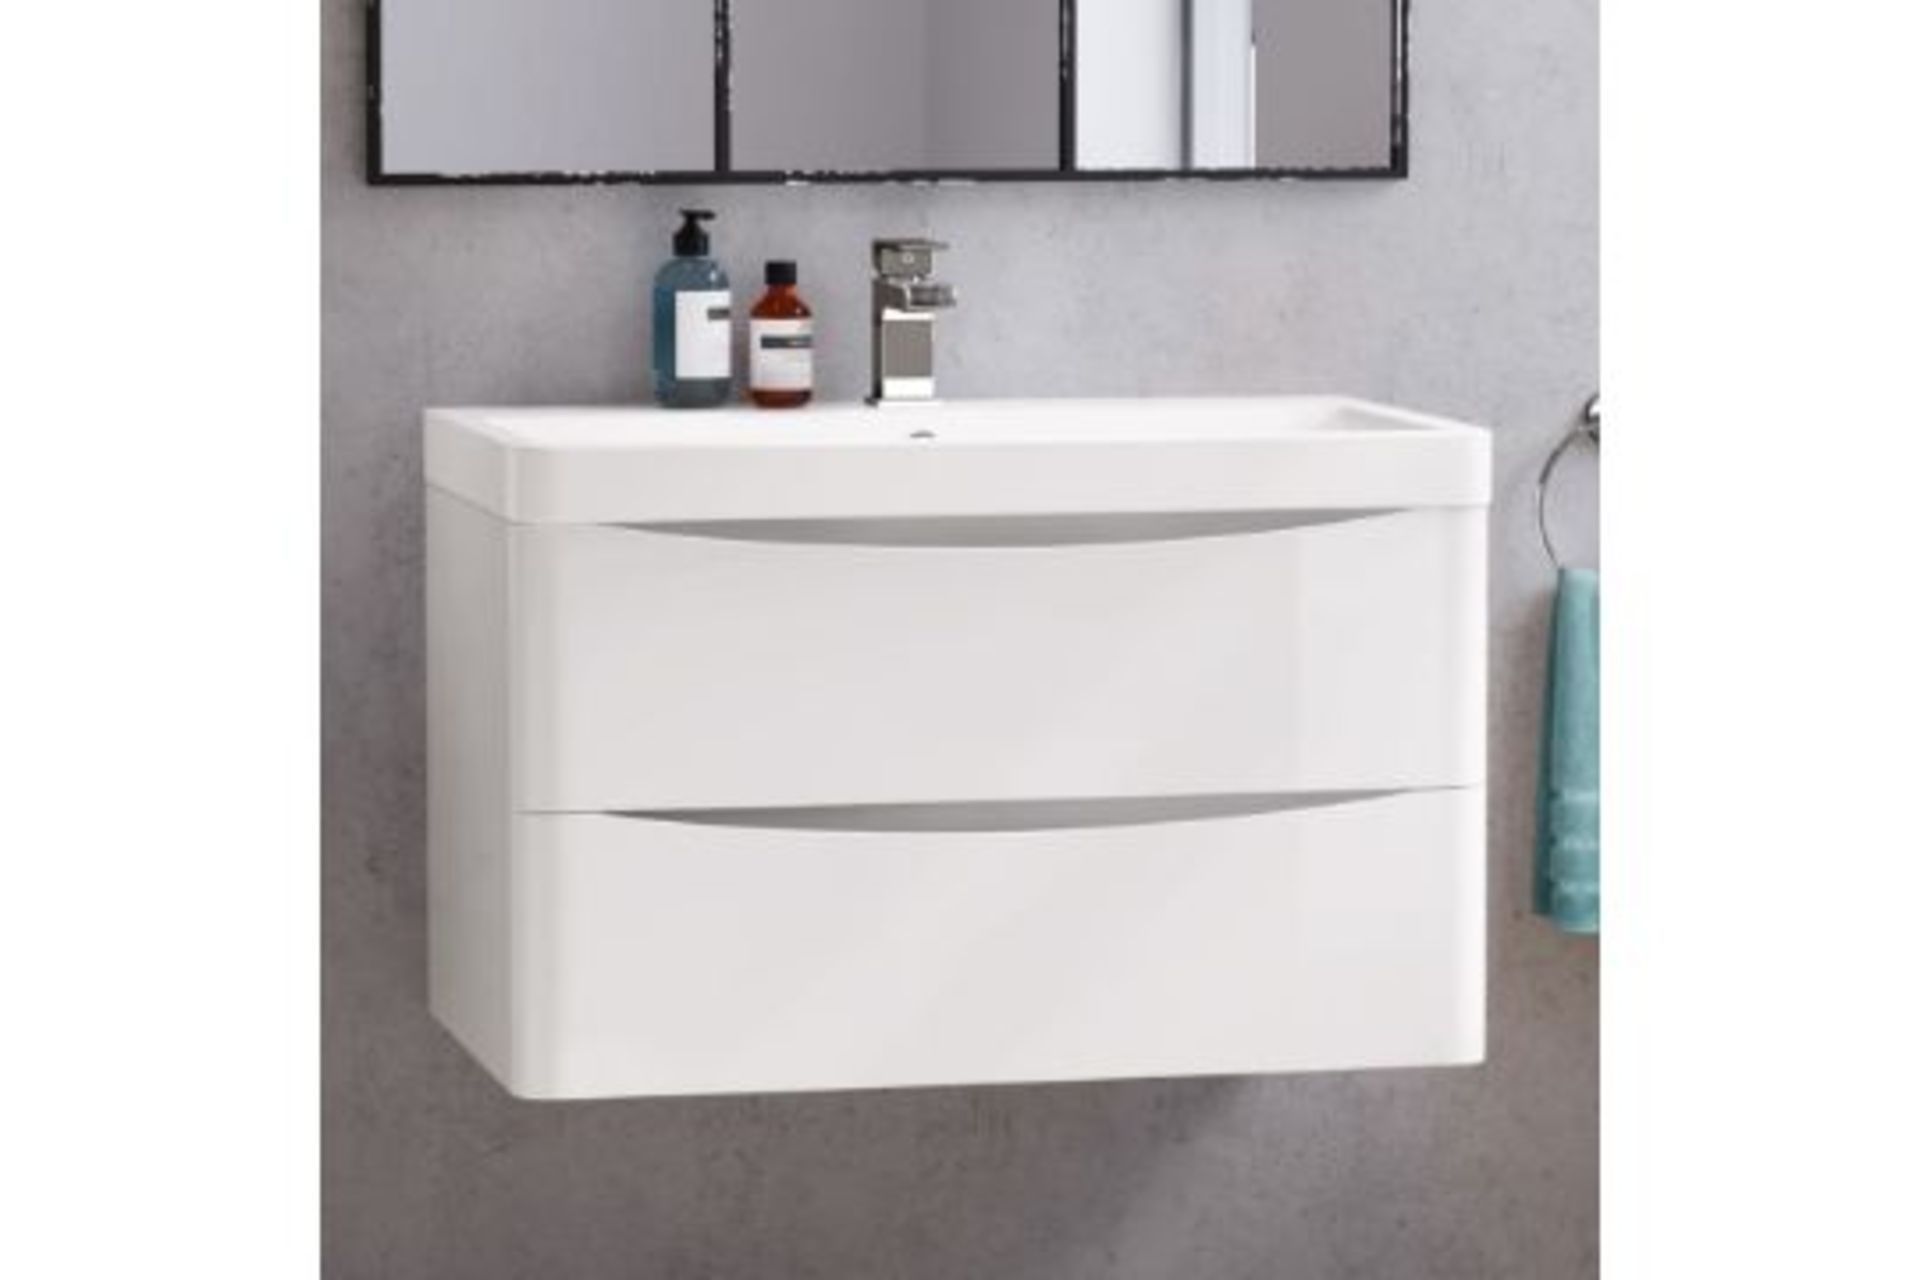 NEW & BOXED 800mm Austin II Gloss White Built In Basin Drawer Unit - Wall Hung MF2419..RRP £849.99.